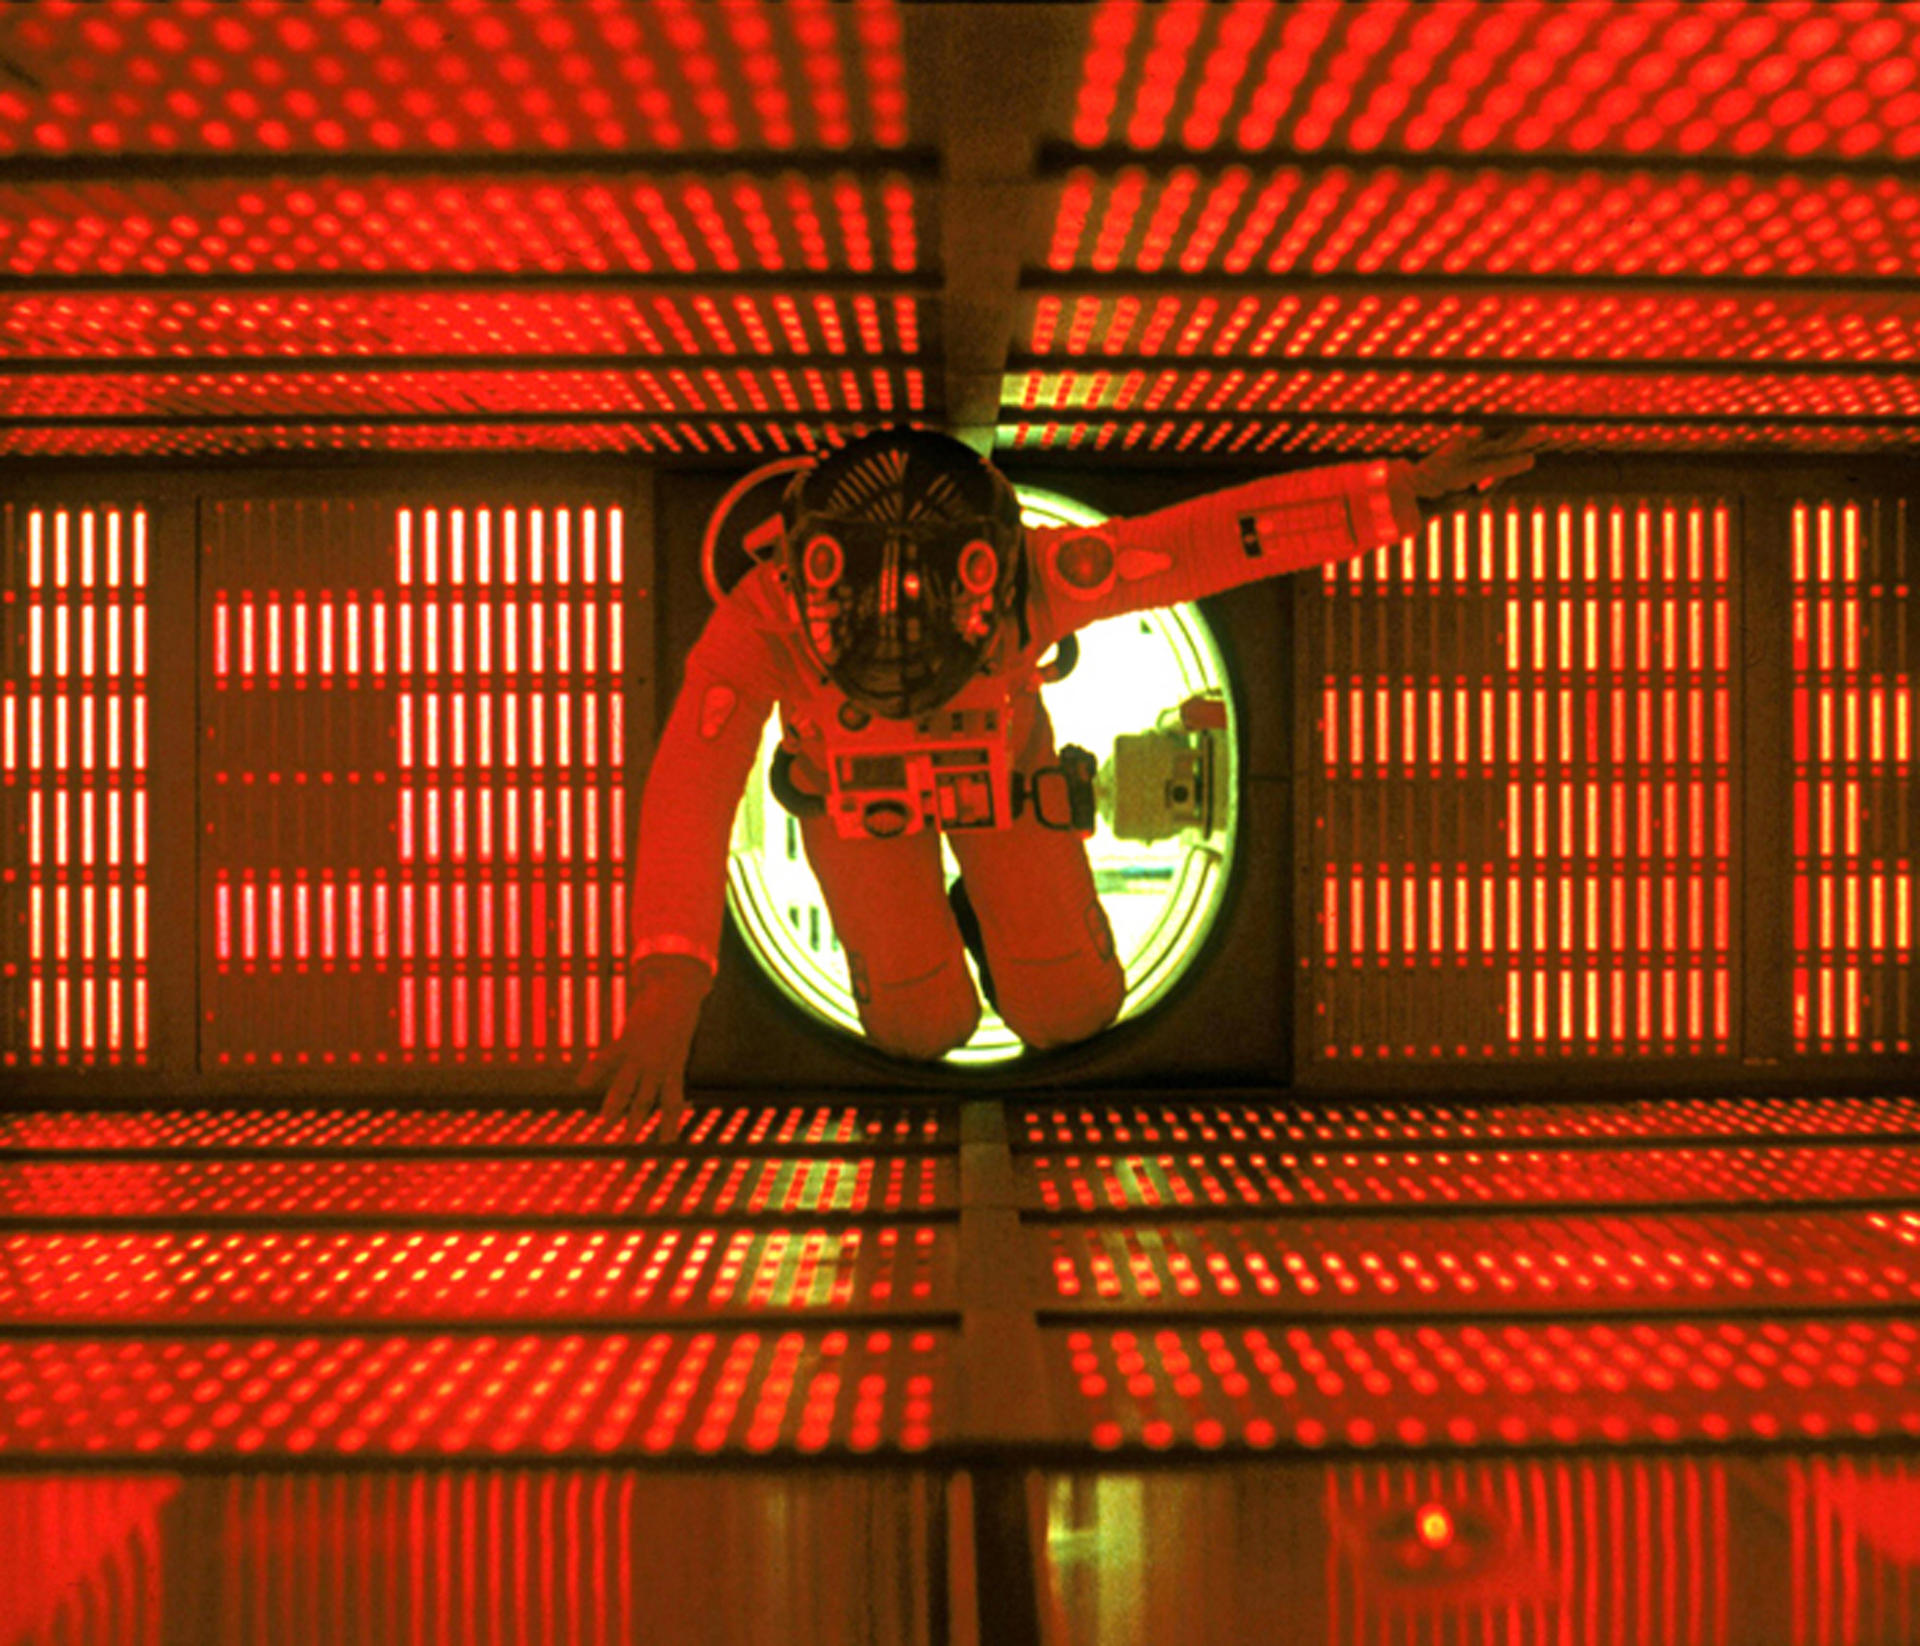 Voice control featured in 2001: A Space Odyssey. Photo: SCMP